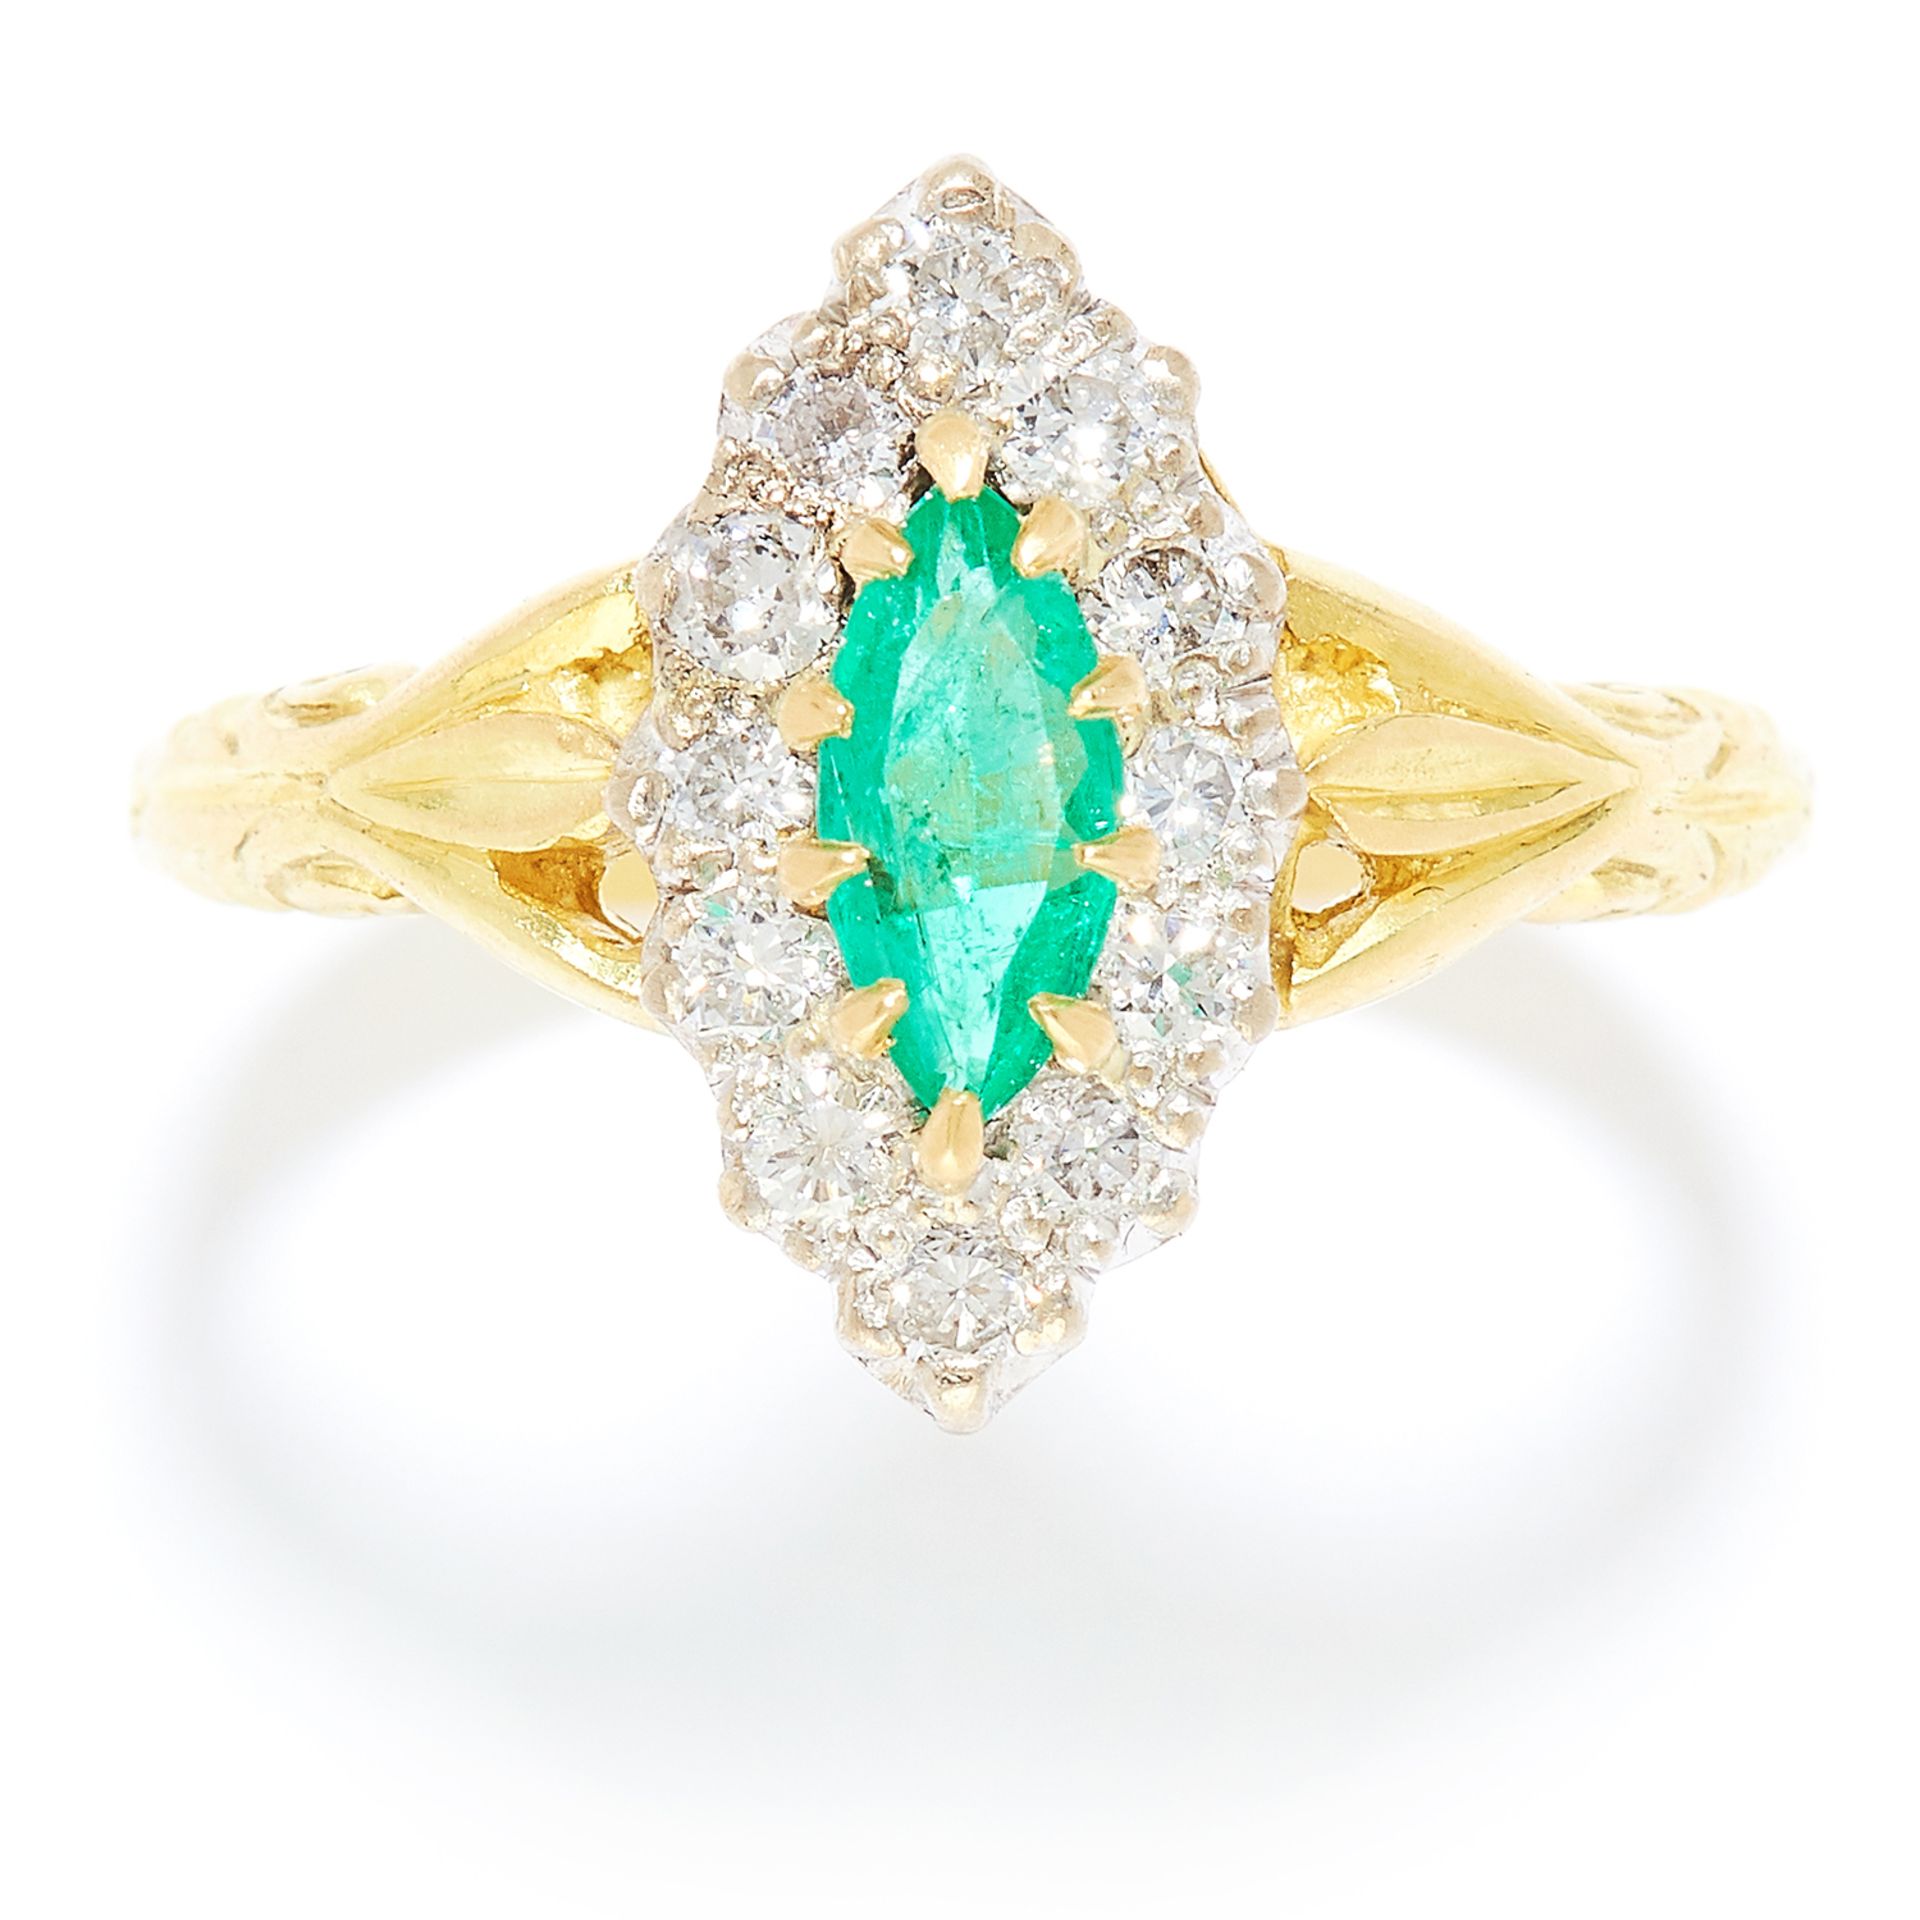 EMERALD AND DIAMOND DRESS RING in 18ct yellow and white gold, the marquise cut emerald encircled